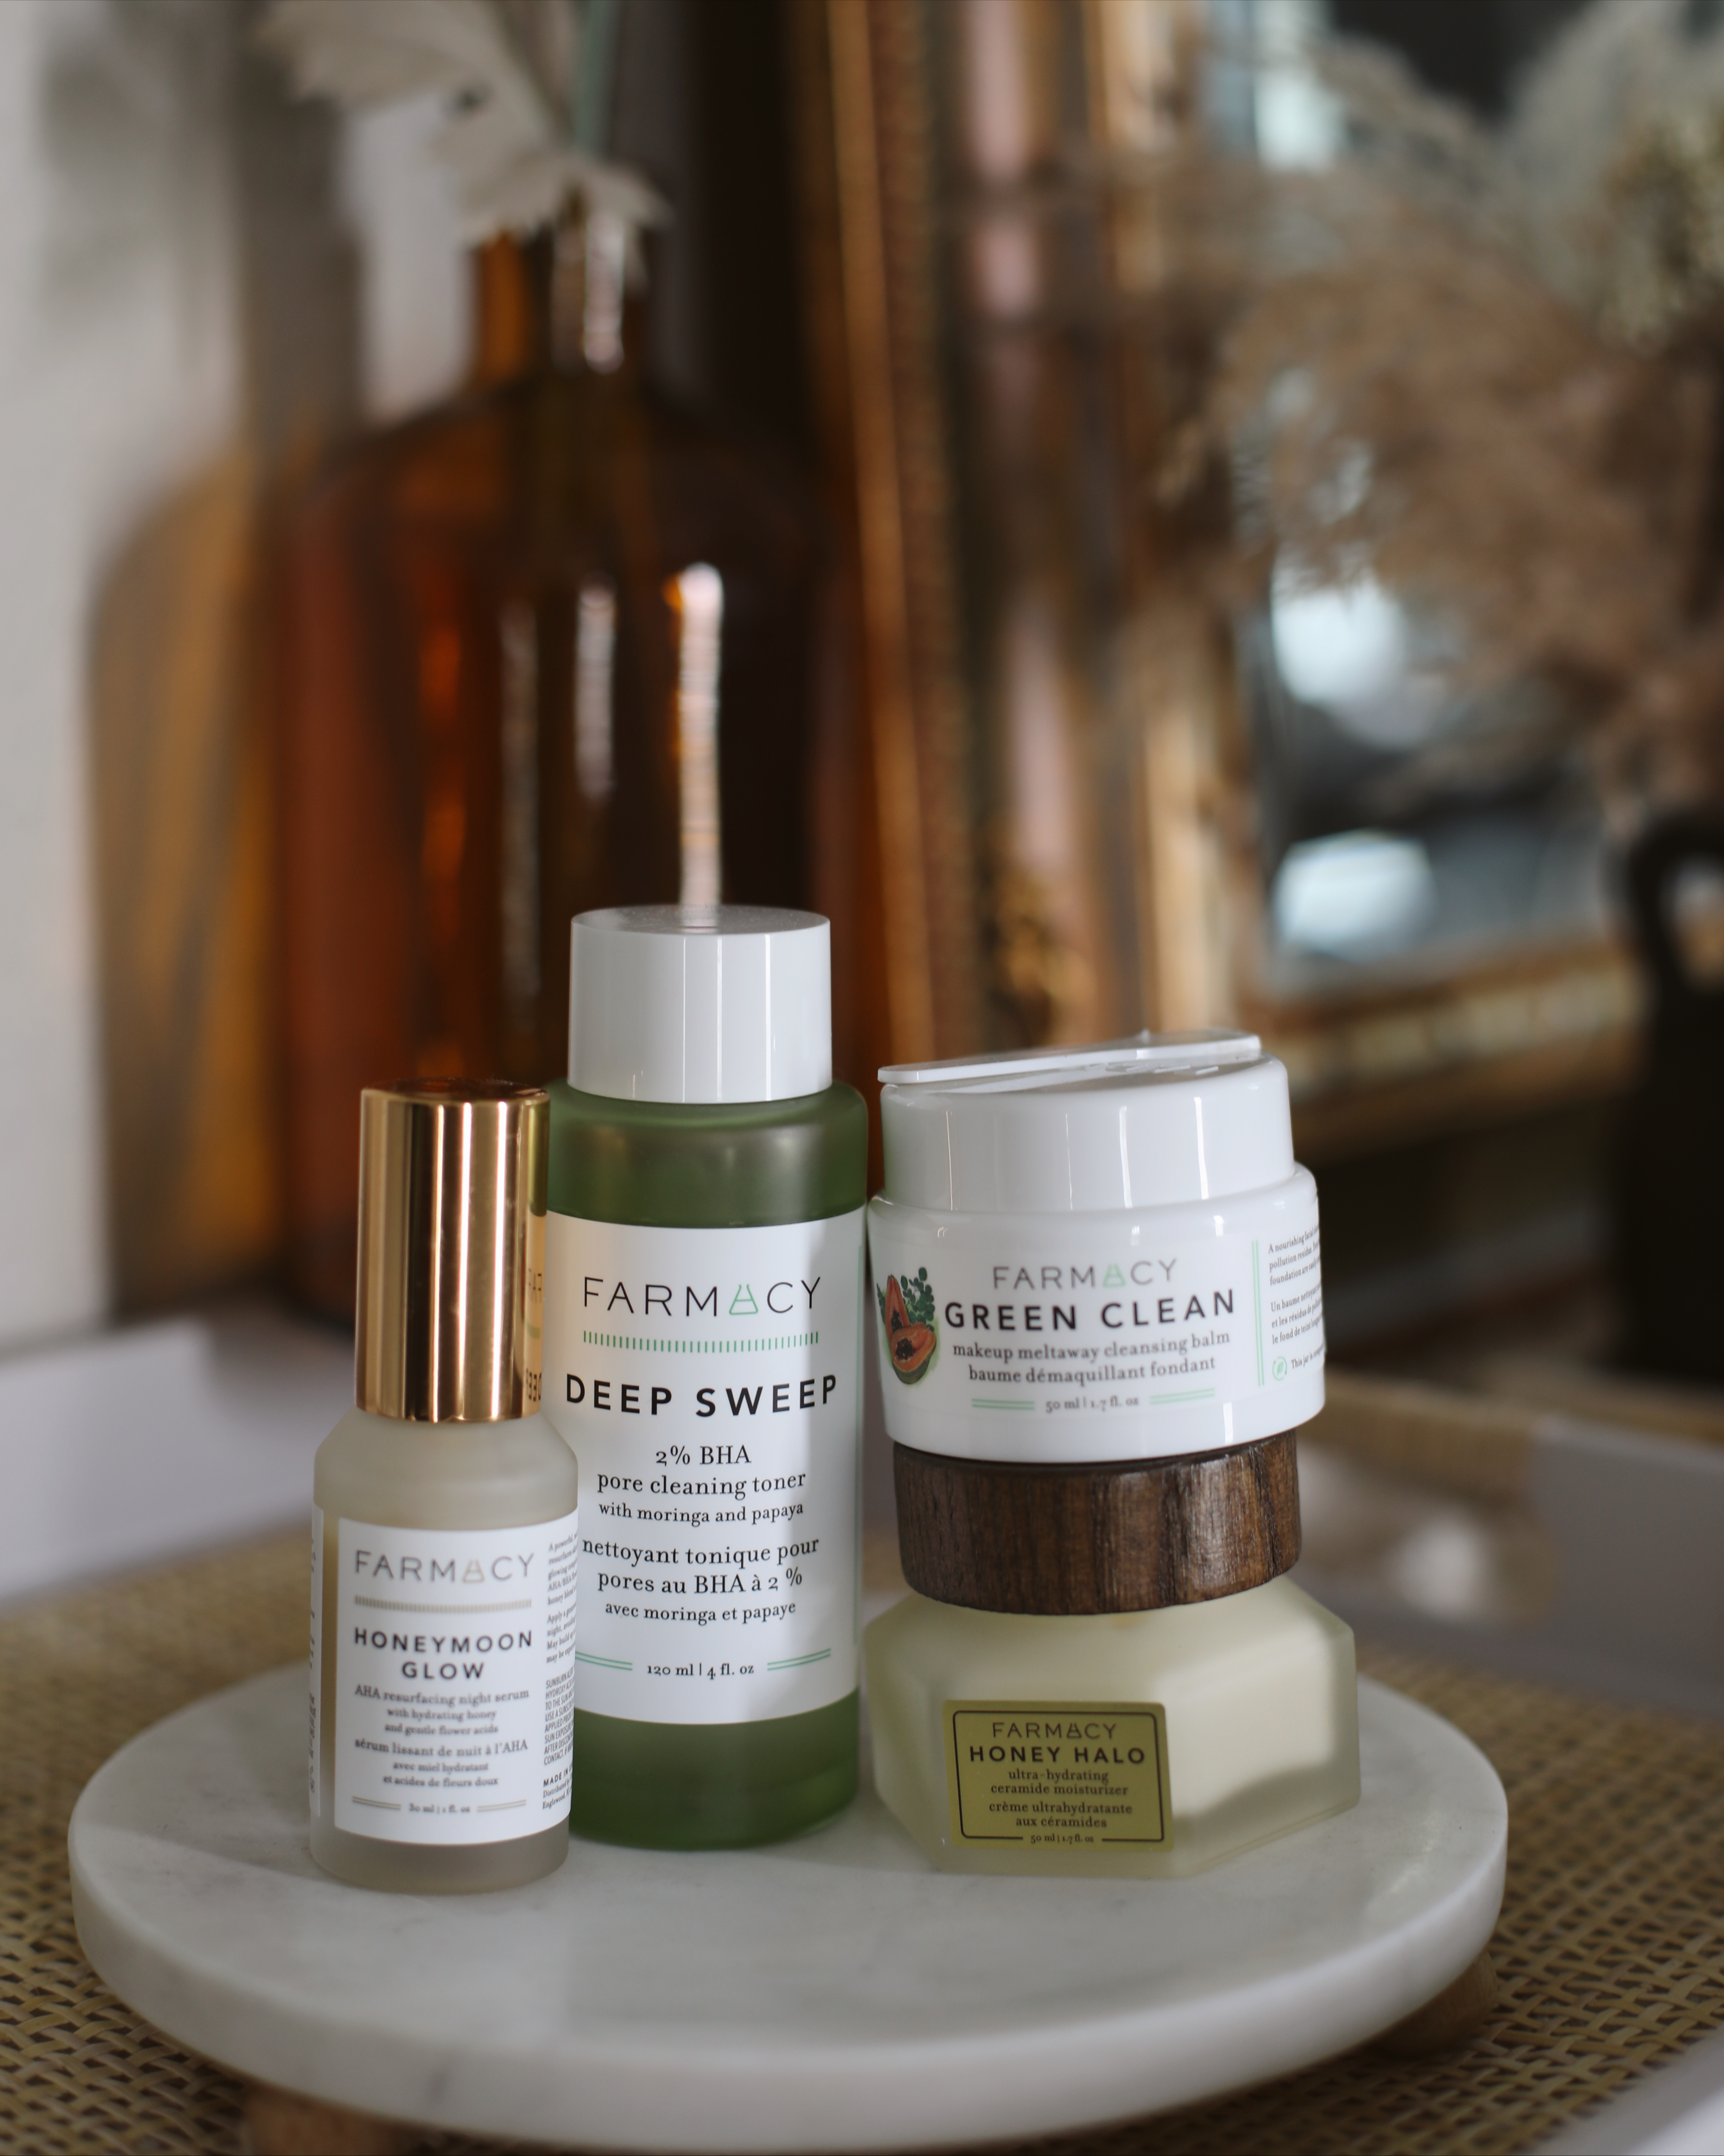 Farmacy Beauty Review - My Farmacy Skincare Routine | Affordable by Amanda